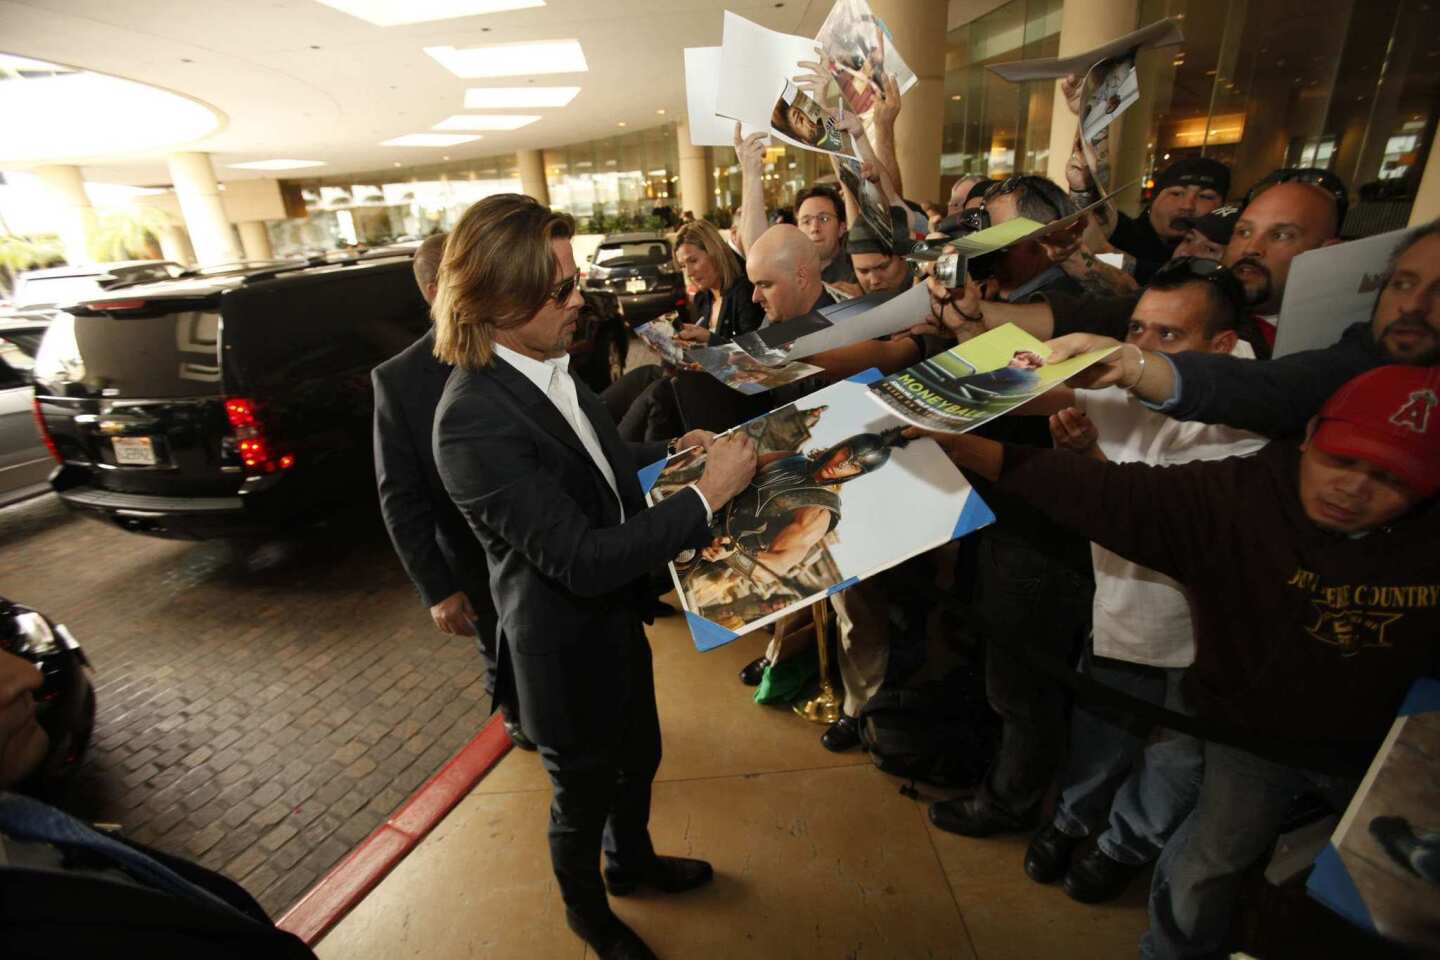 "Moneyball" and "The Tree of Life" nominee Brad Pitt signs autographs outside the Beverly Hilton Hotel.